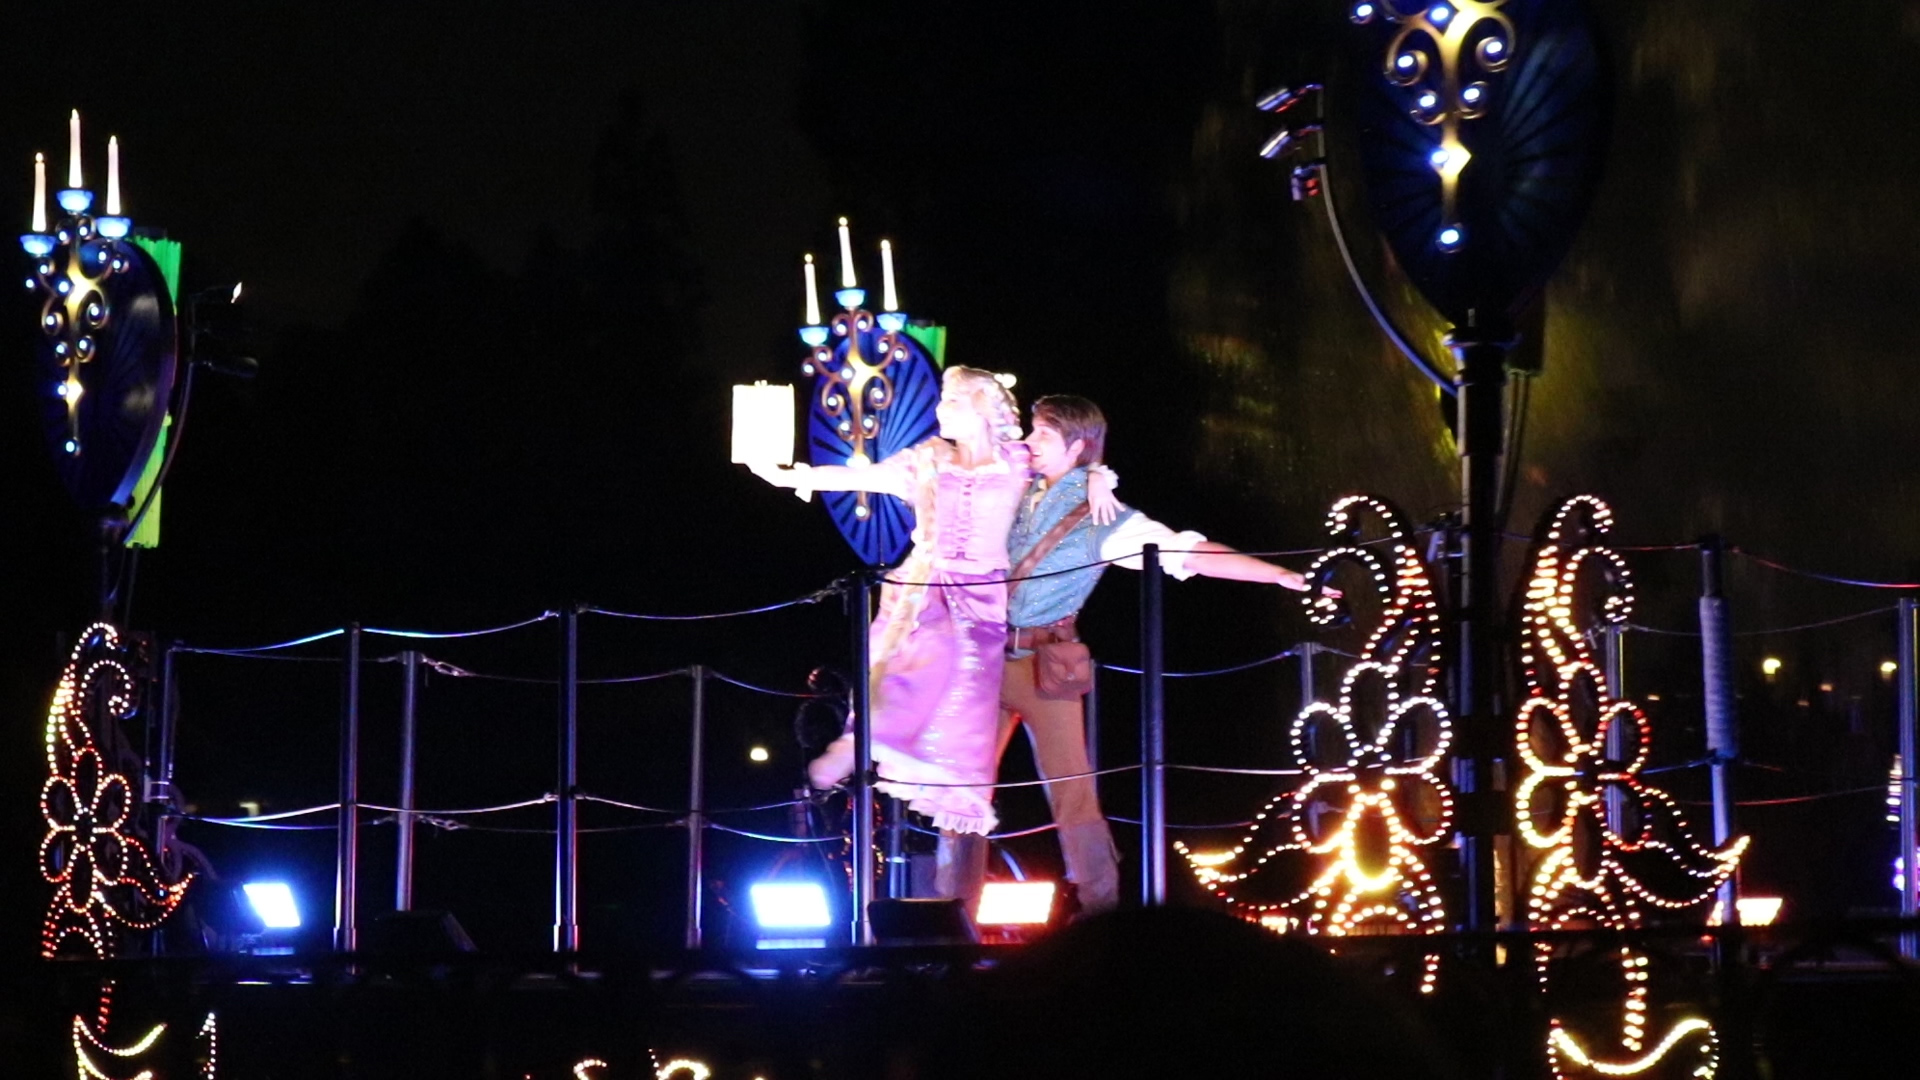 Flynn and Rapunzel take the place of Snow White and Prince Charming in the new version of Fantasmic.